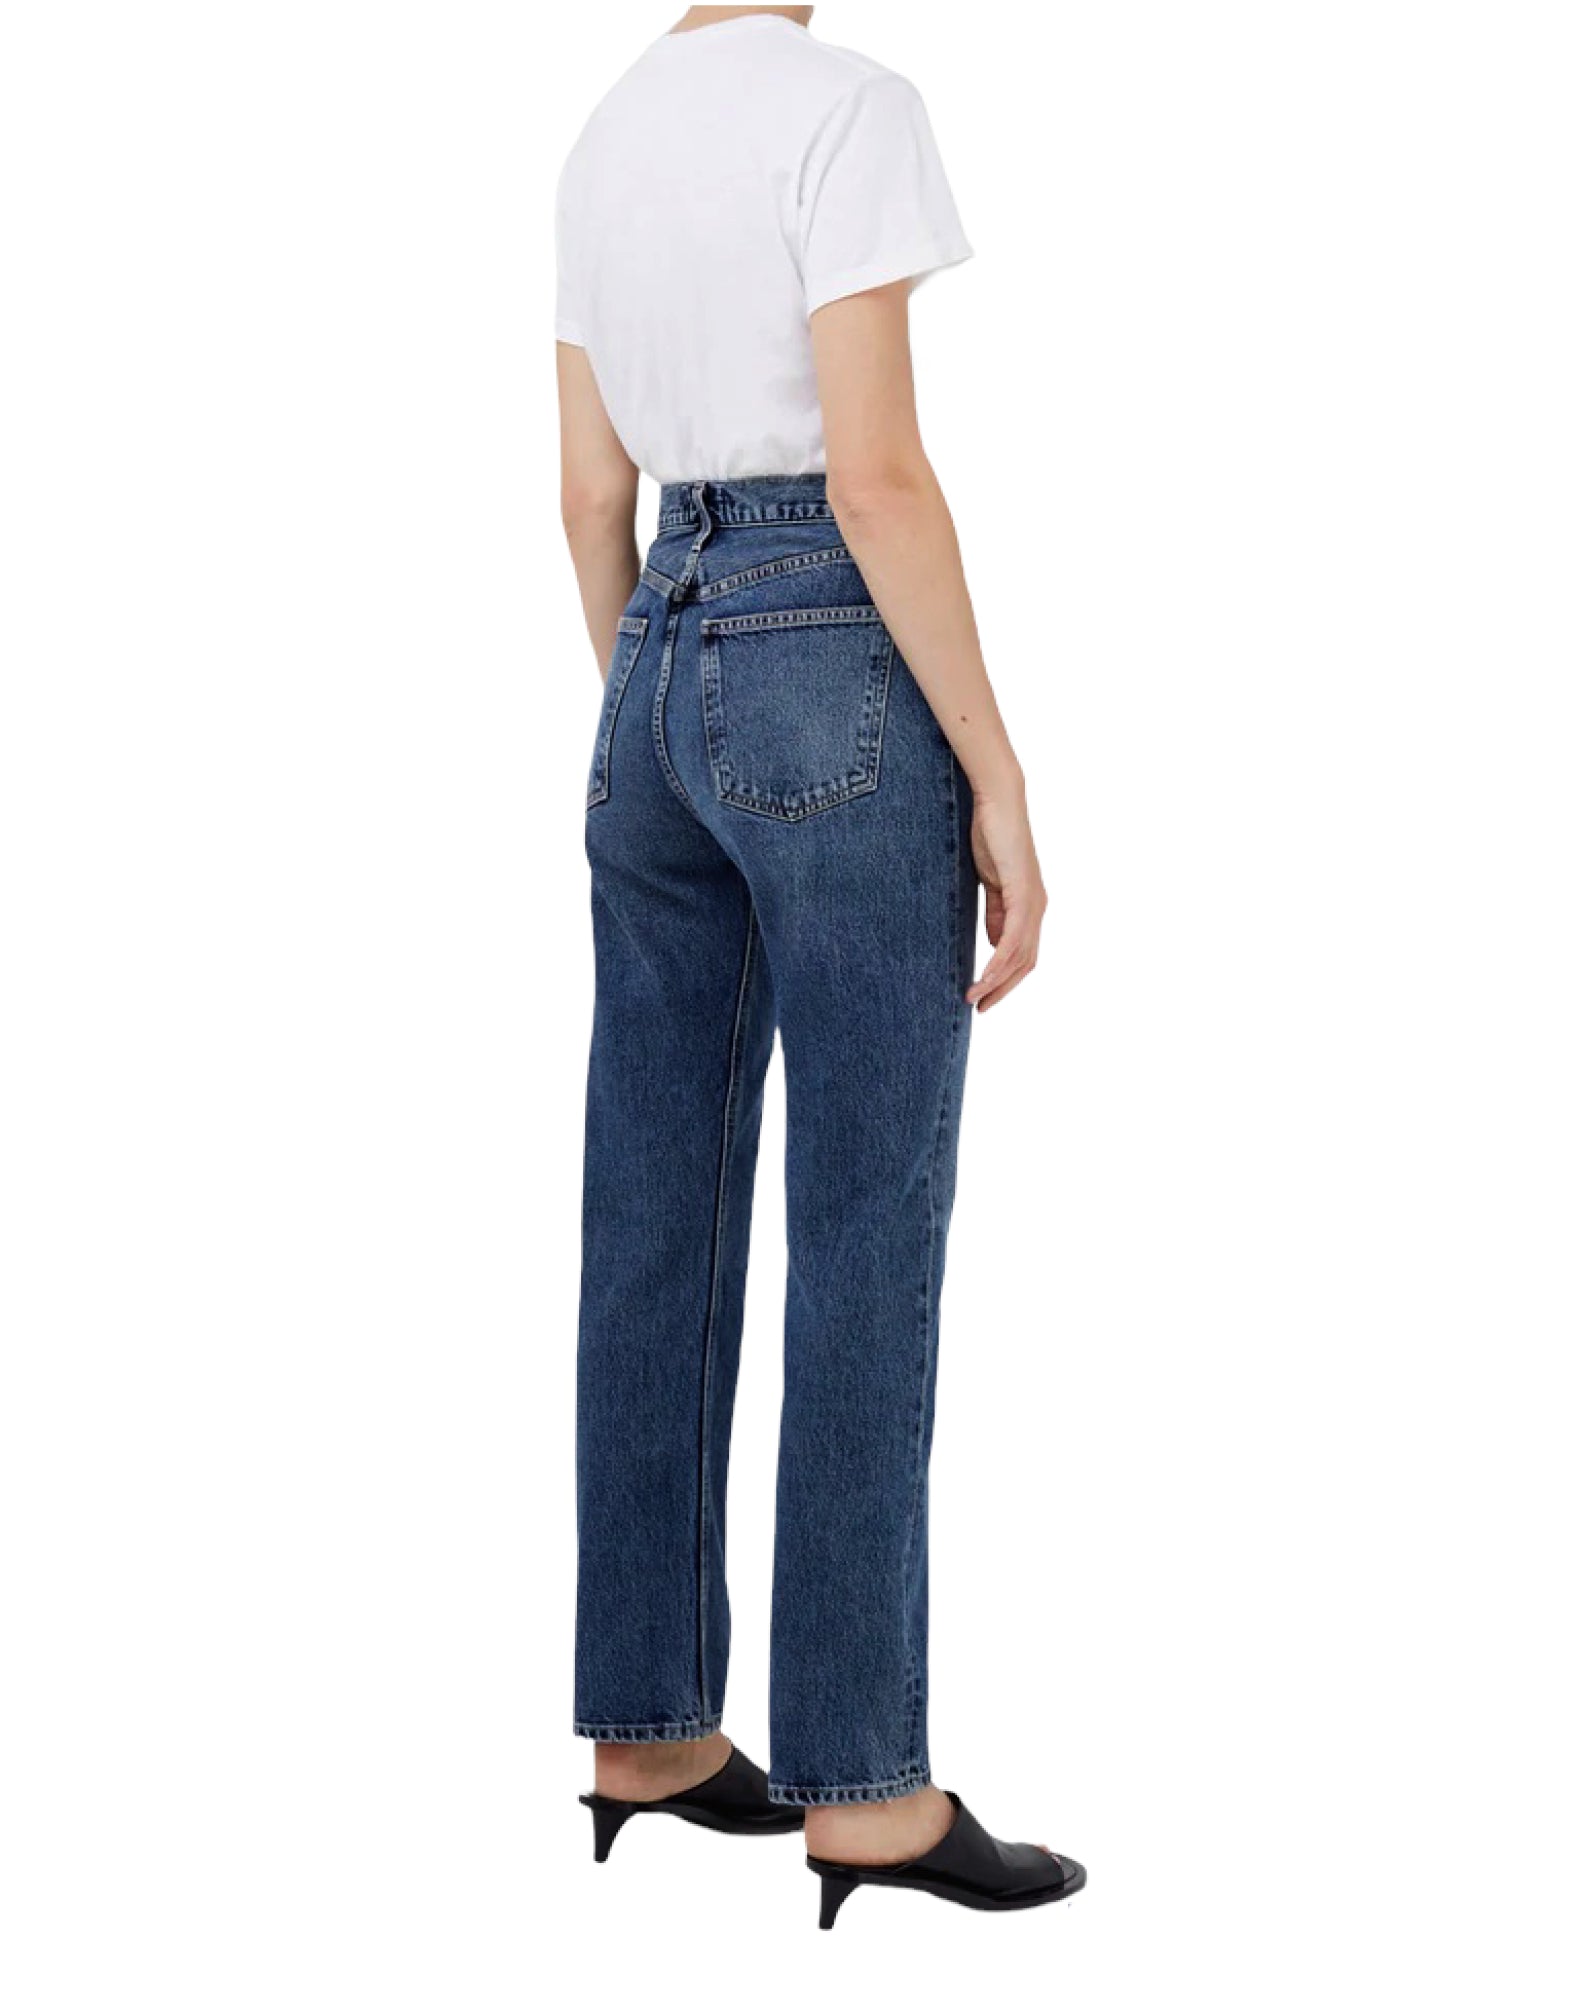 Jeans woman AGOLDE A9024 1206 METHOD